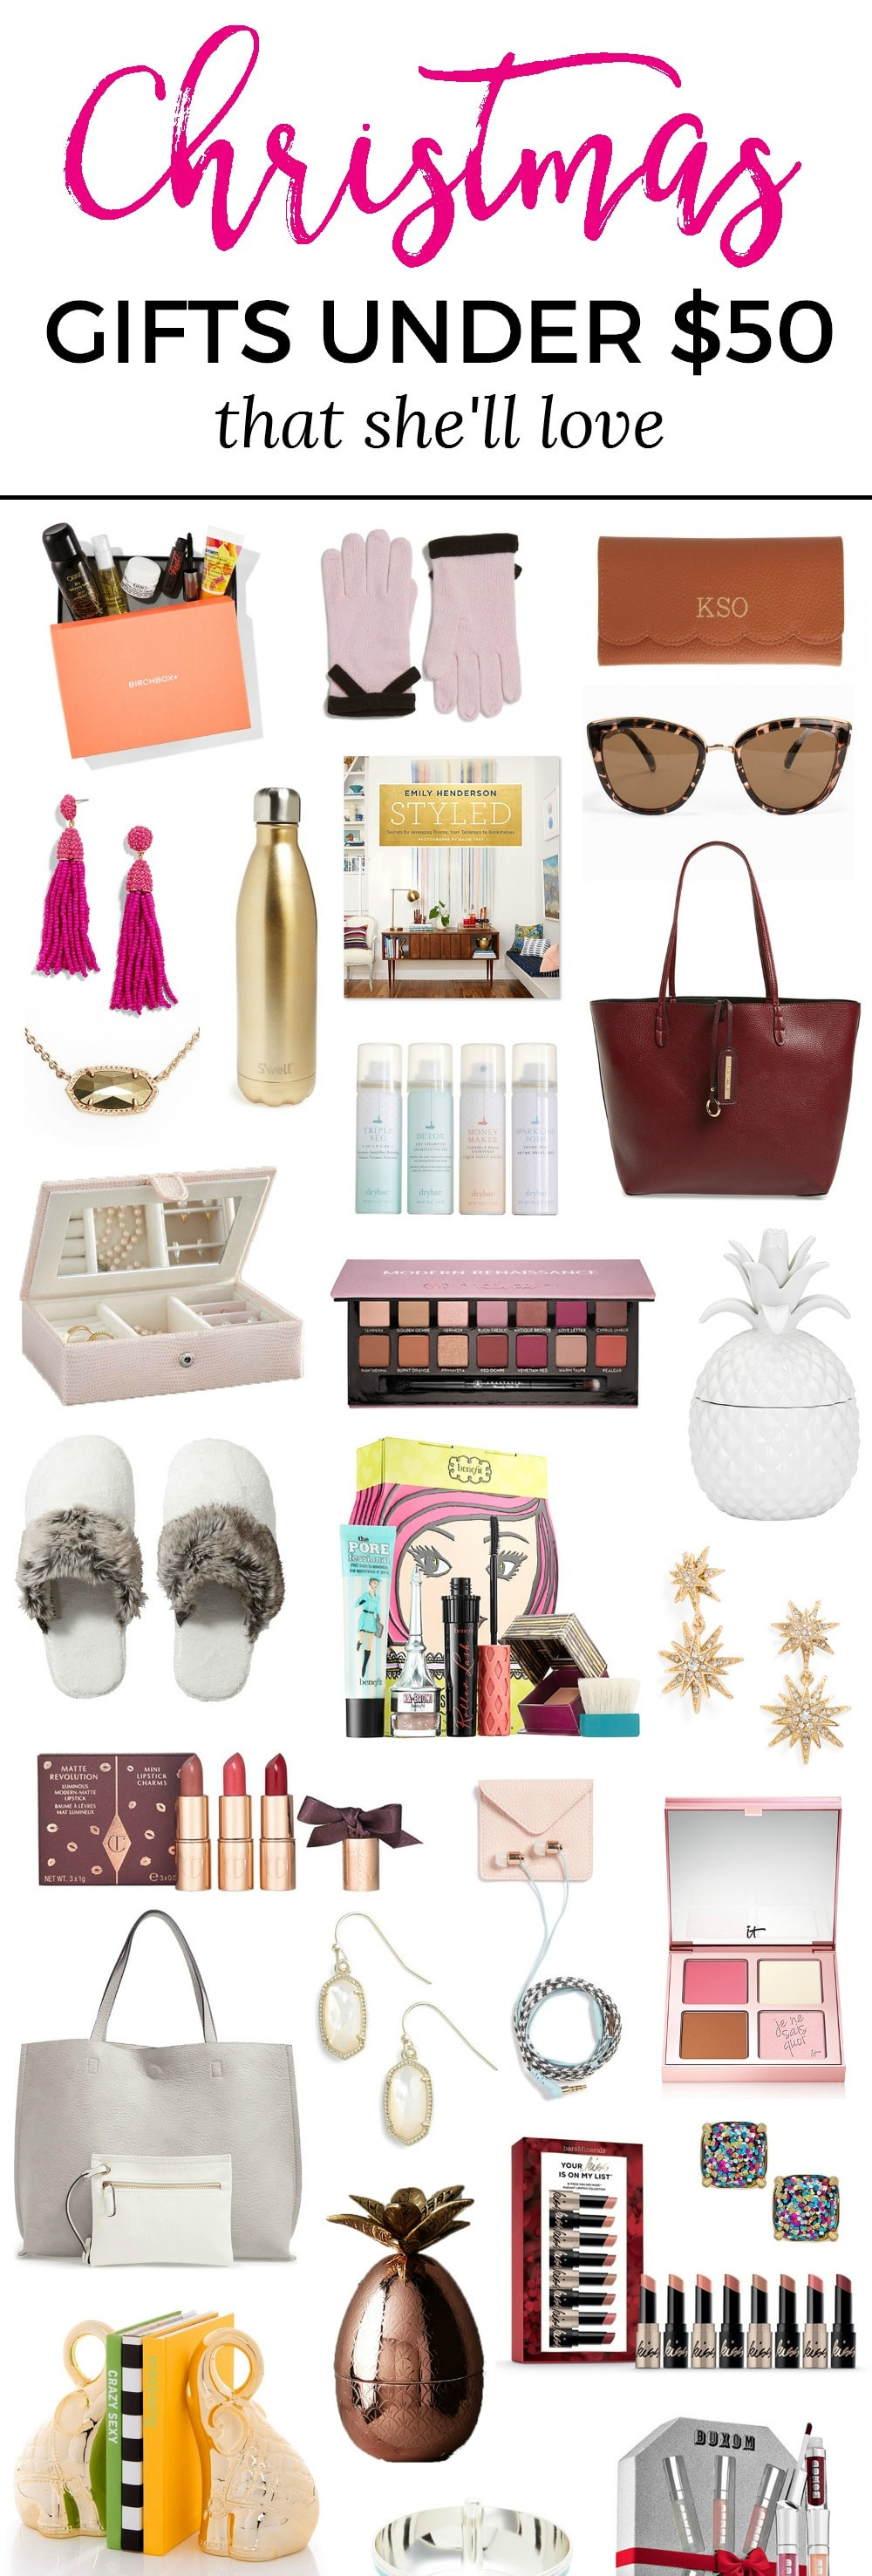 Top Christmas Gift Ideas
 The Best Christmas Gift Ideas for Women under $50